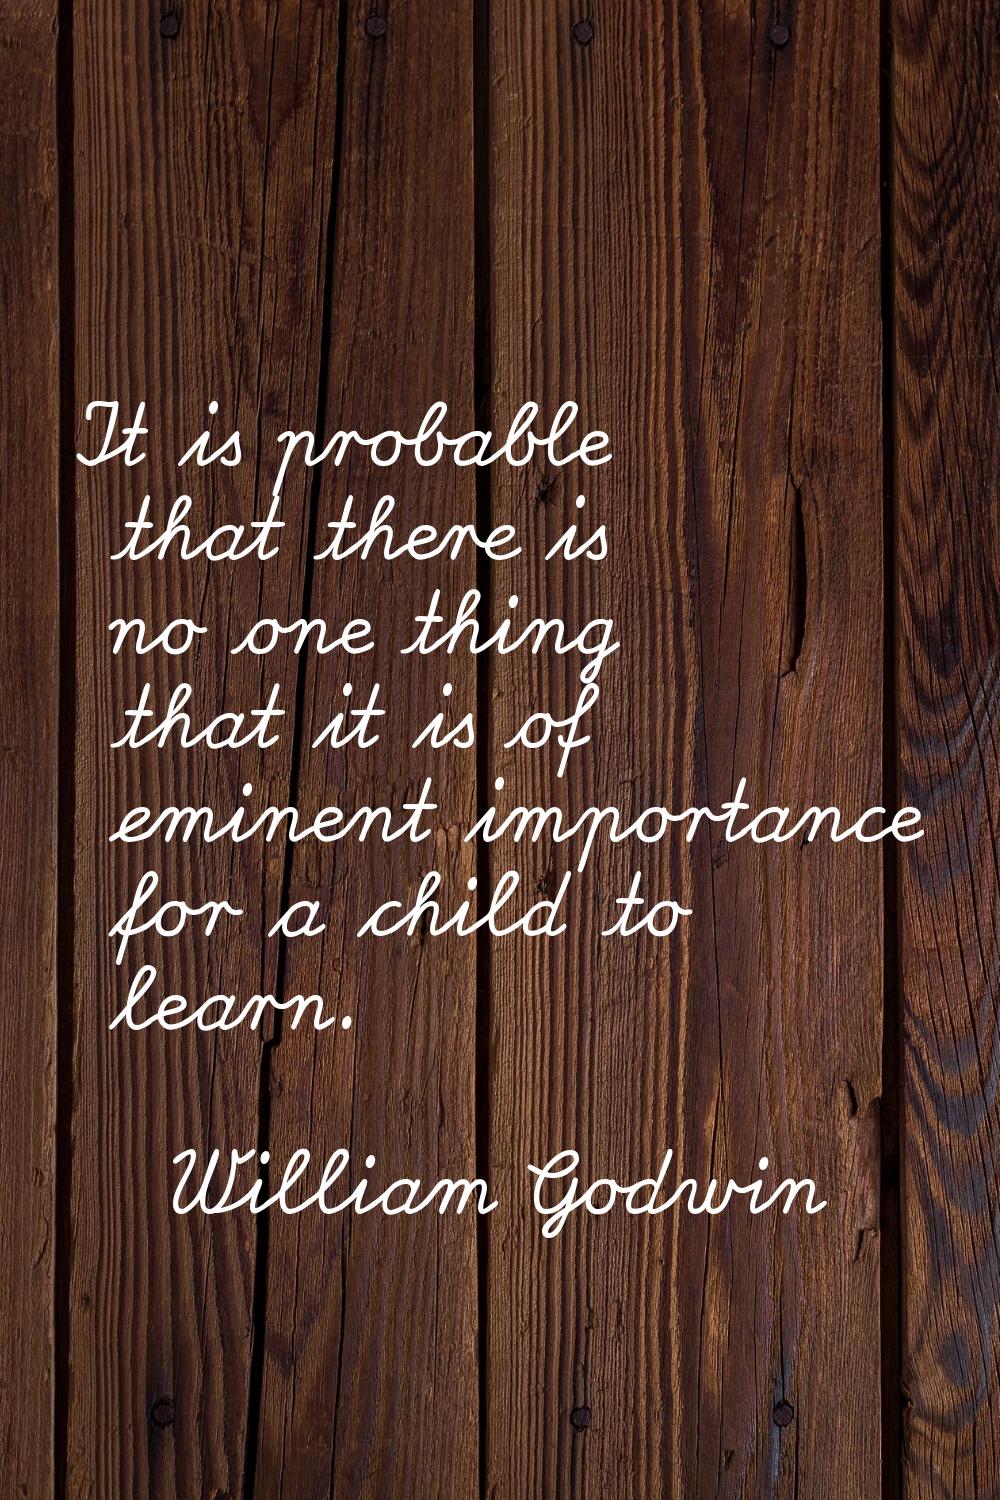 It is probable that there is no one thing that it is of eminent importance for a child to learn.